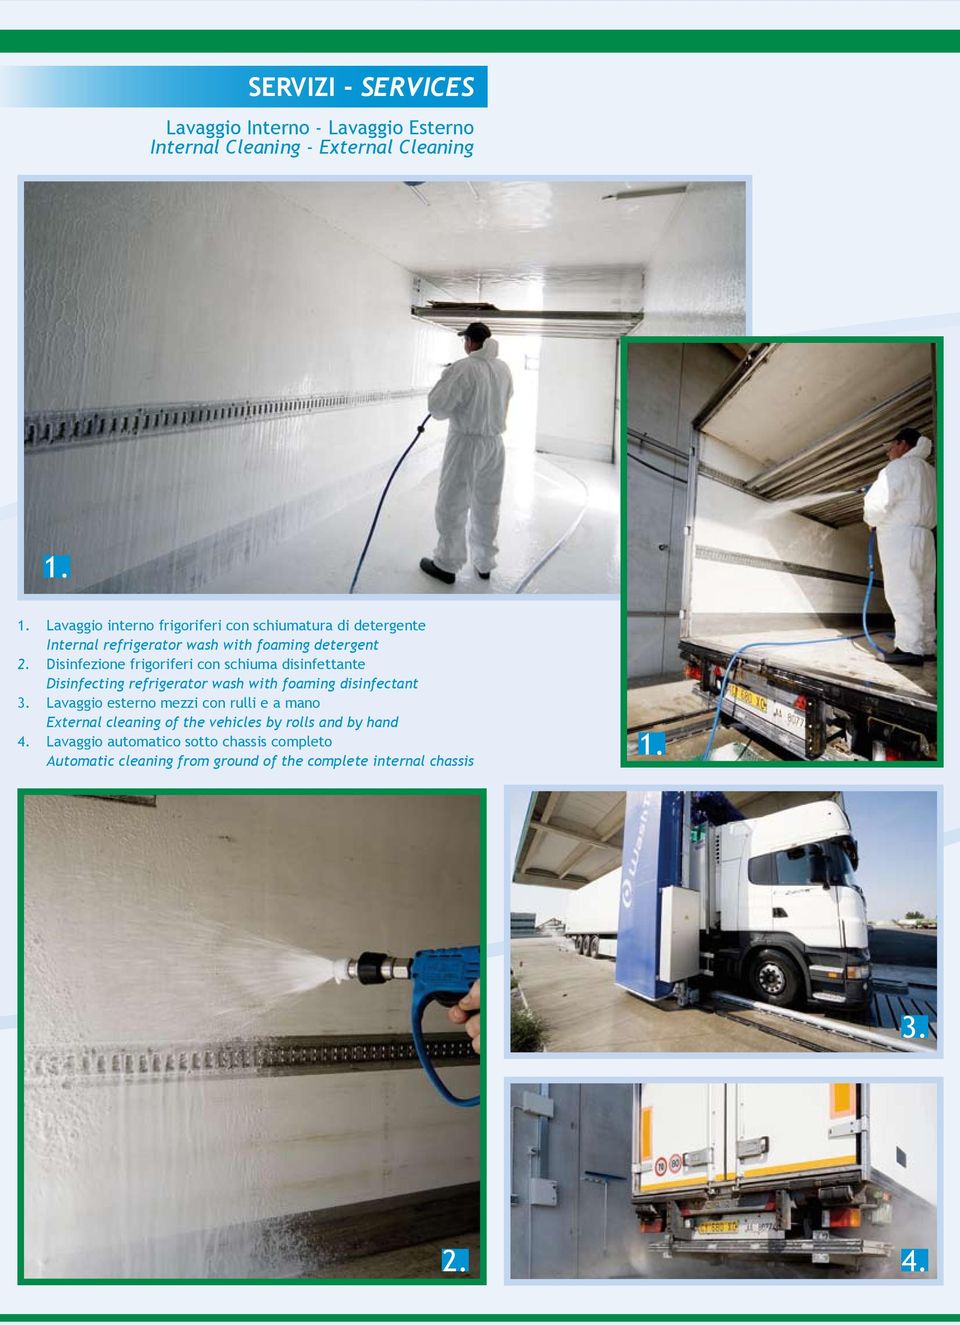 Disinfecting refrigerator wash with foaming disinfectant Lavaggio esterno mezzi con rulli e a mano External cleaning of the